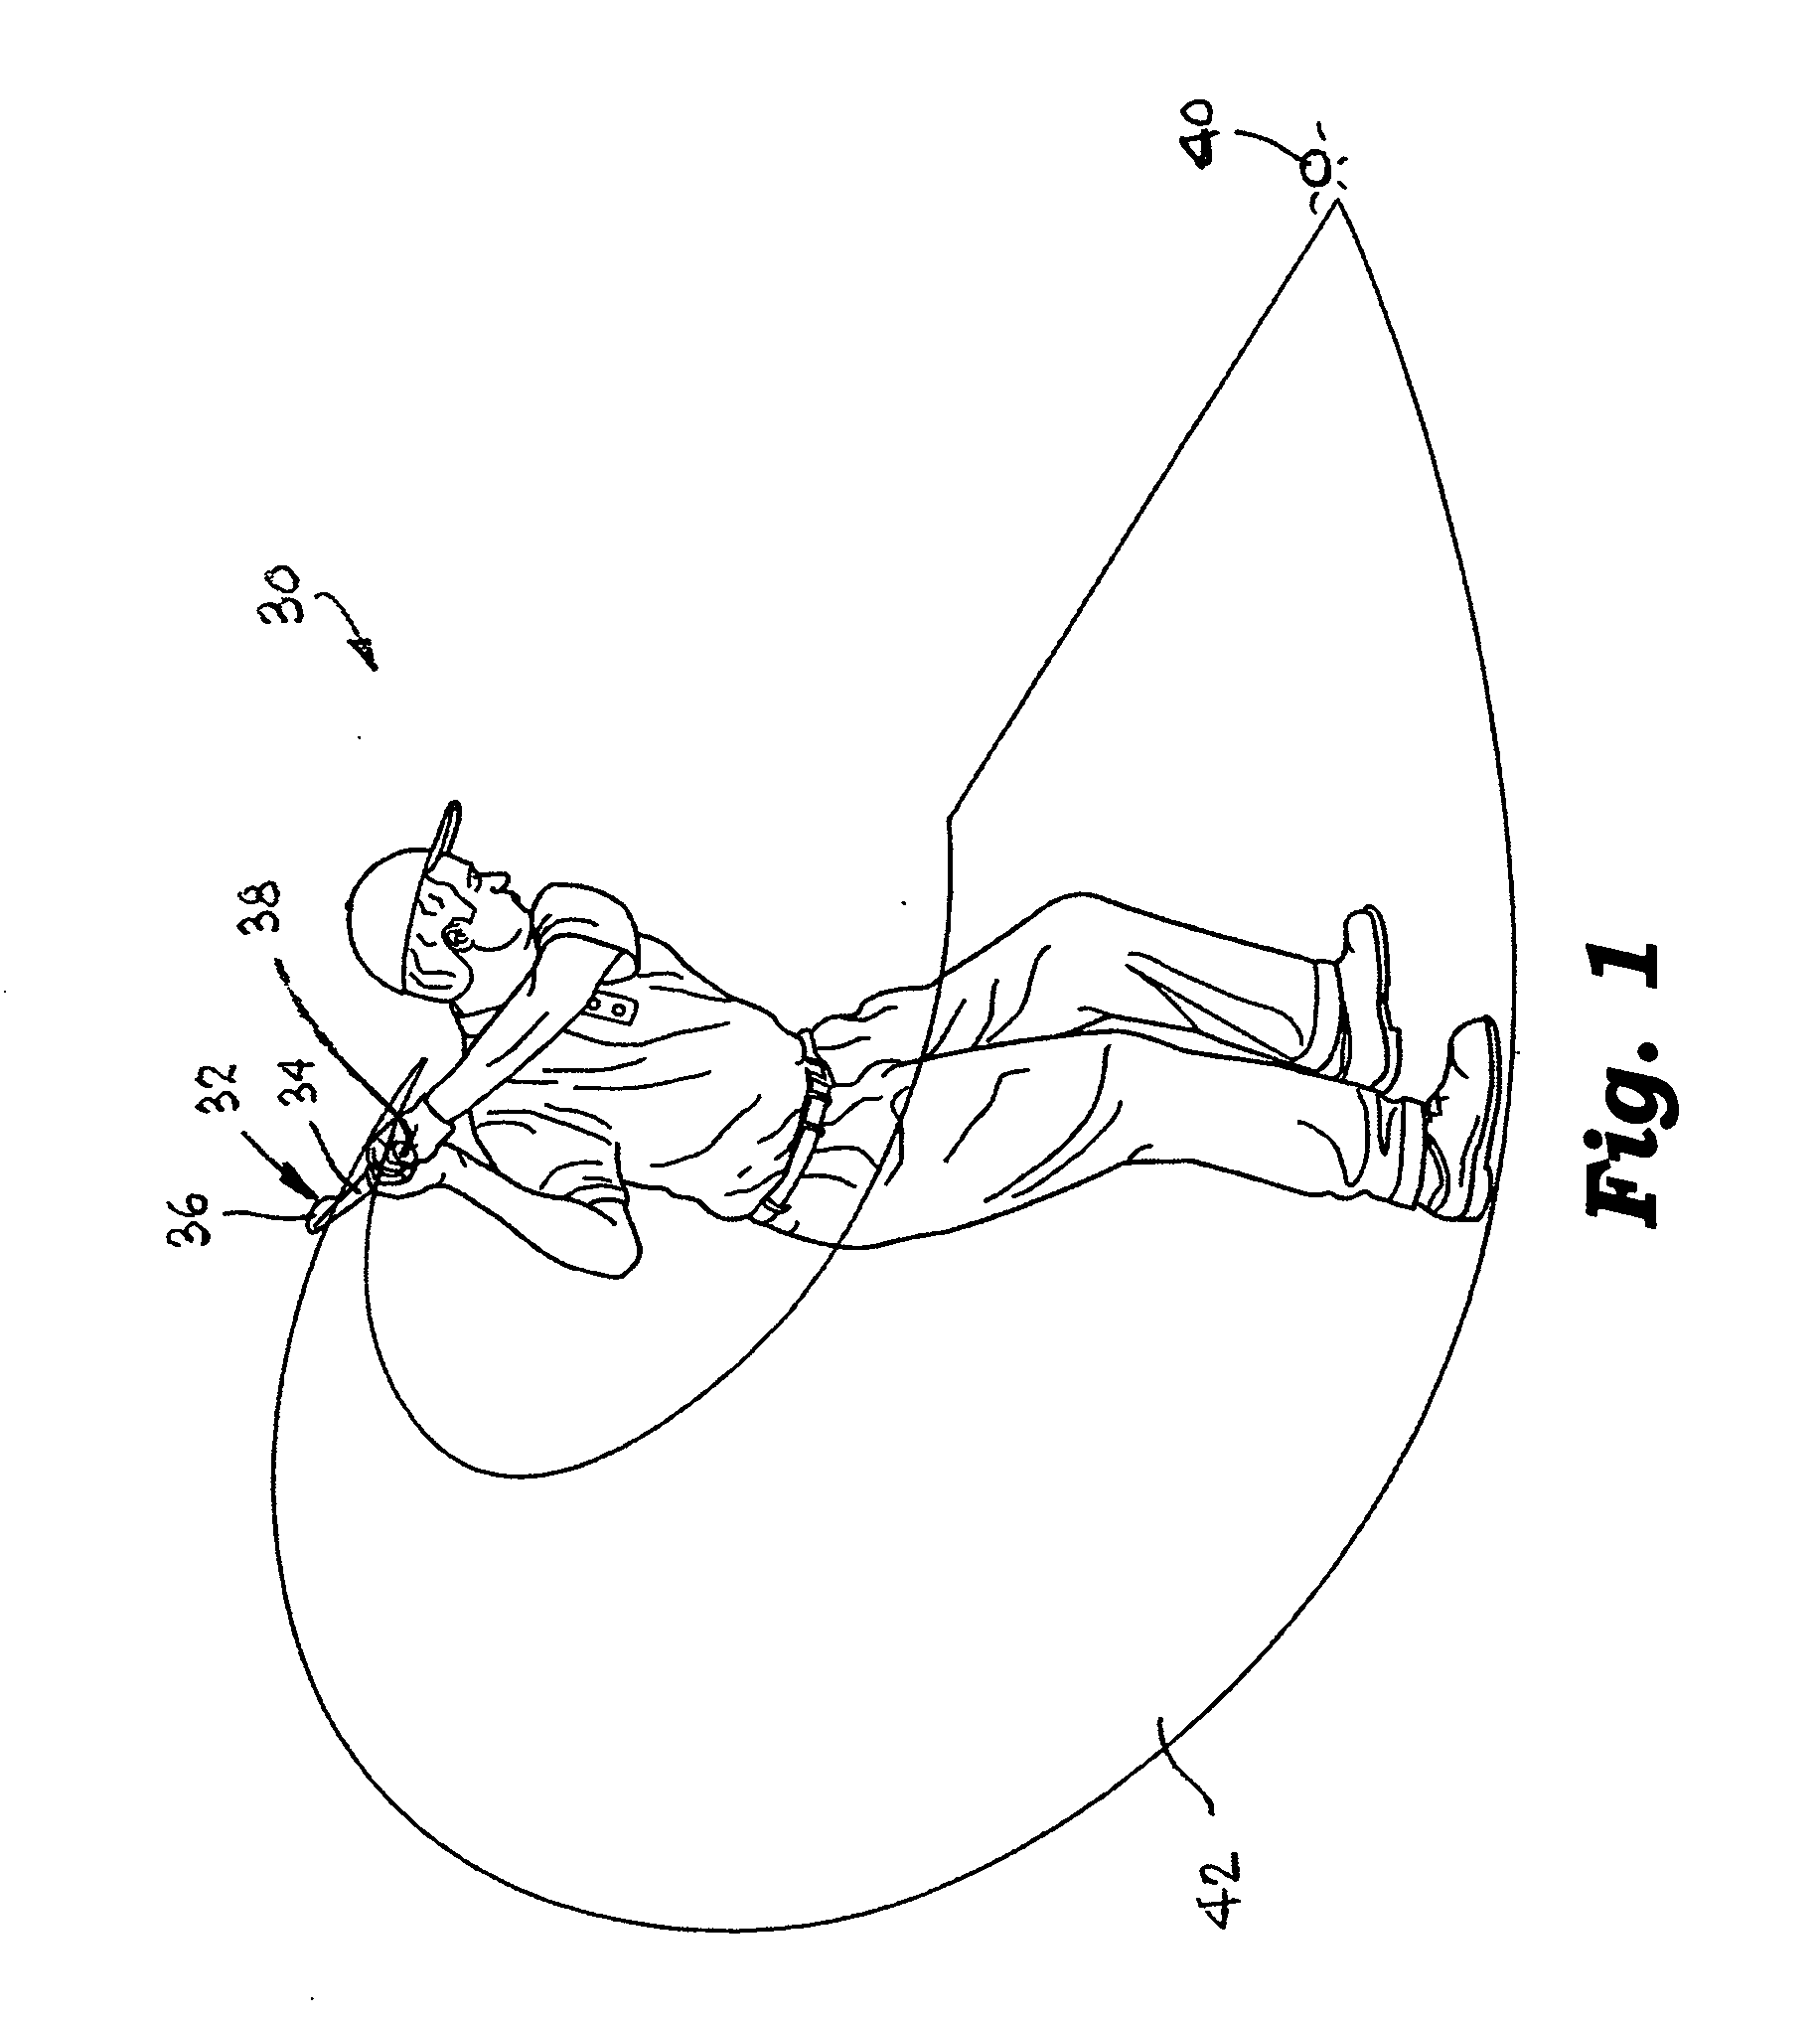 Muscle training apparatus and method